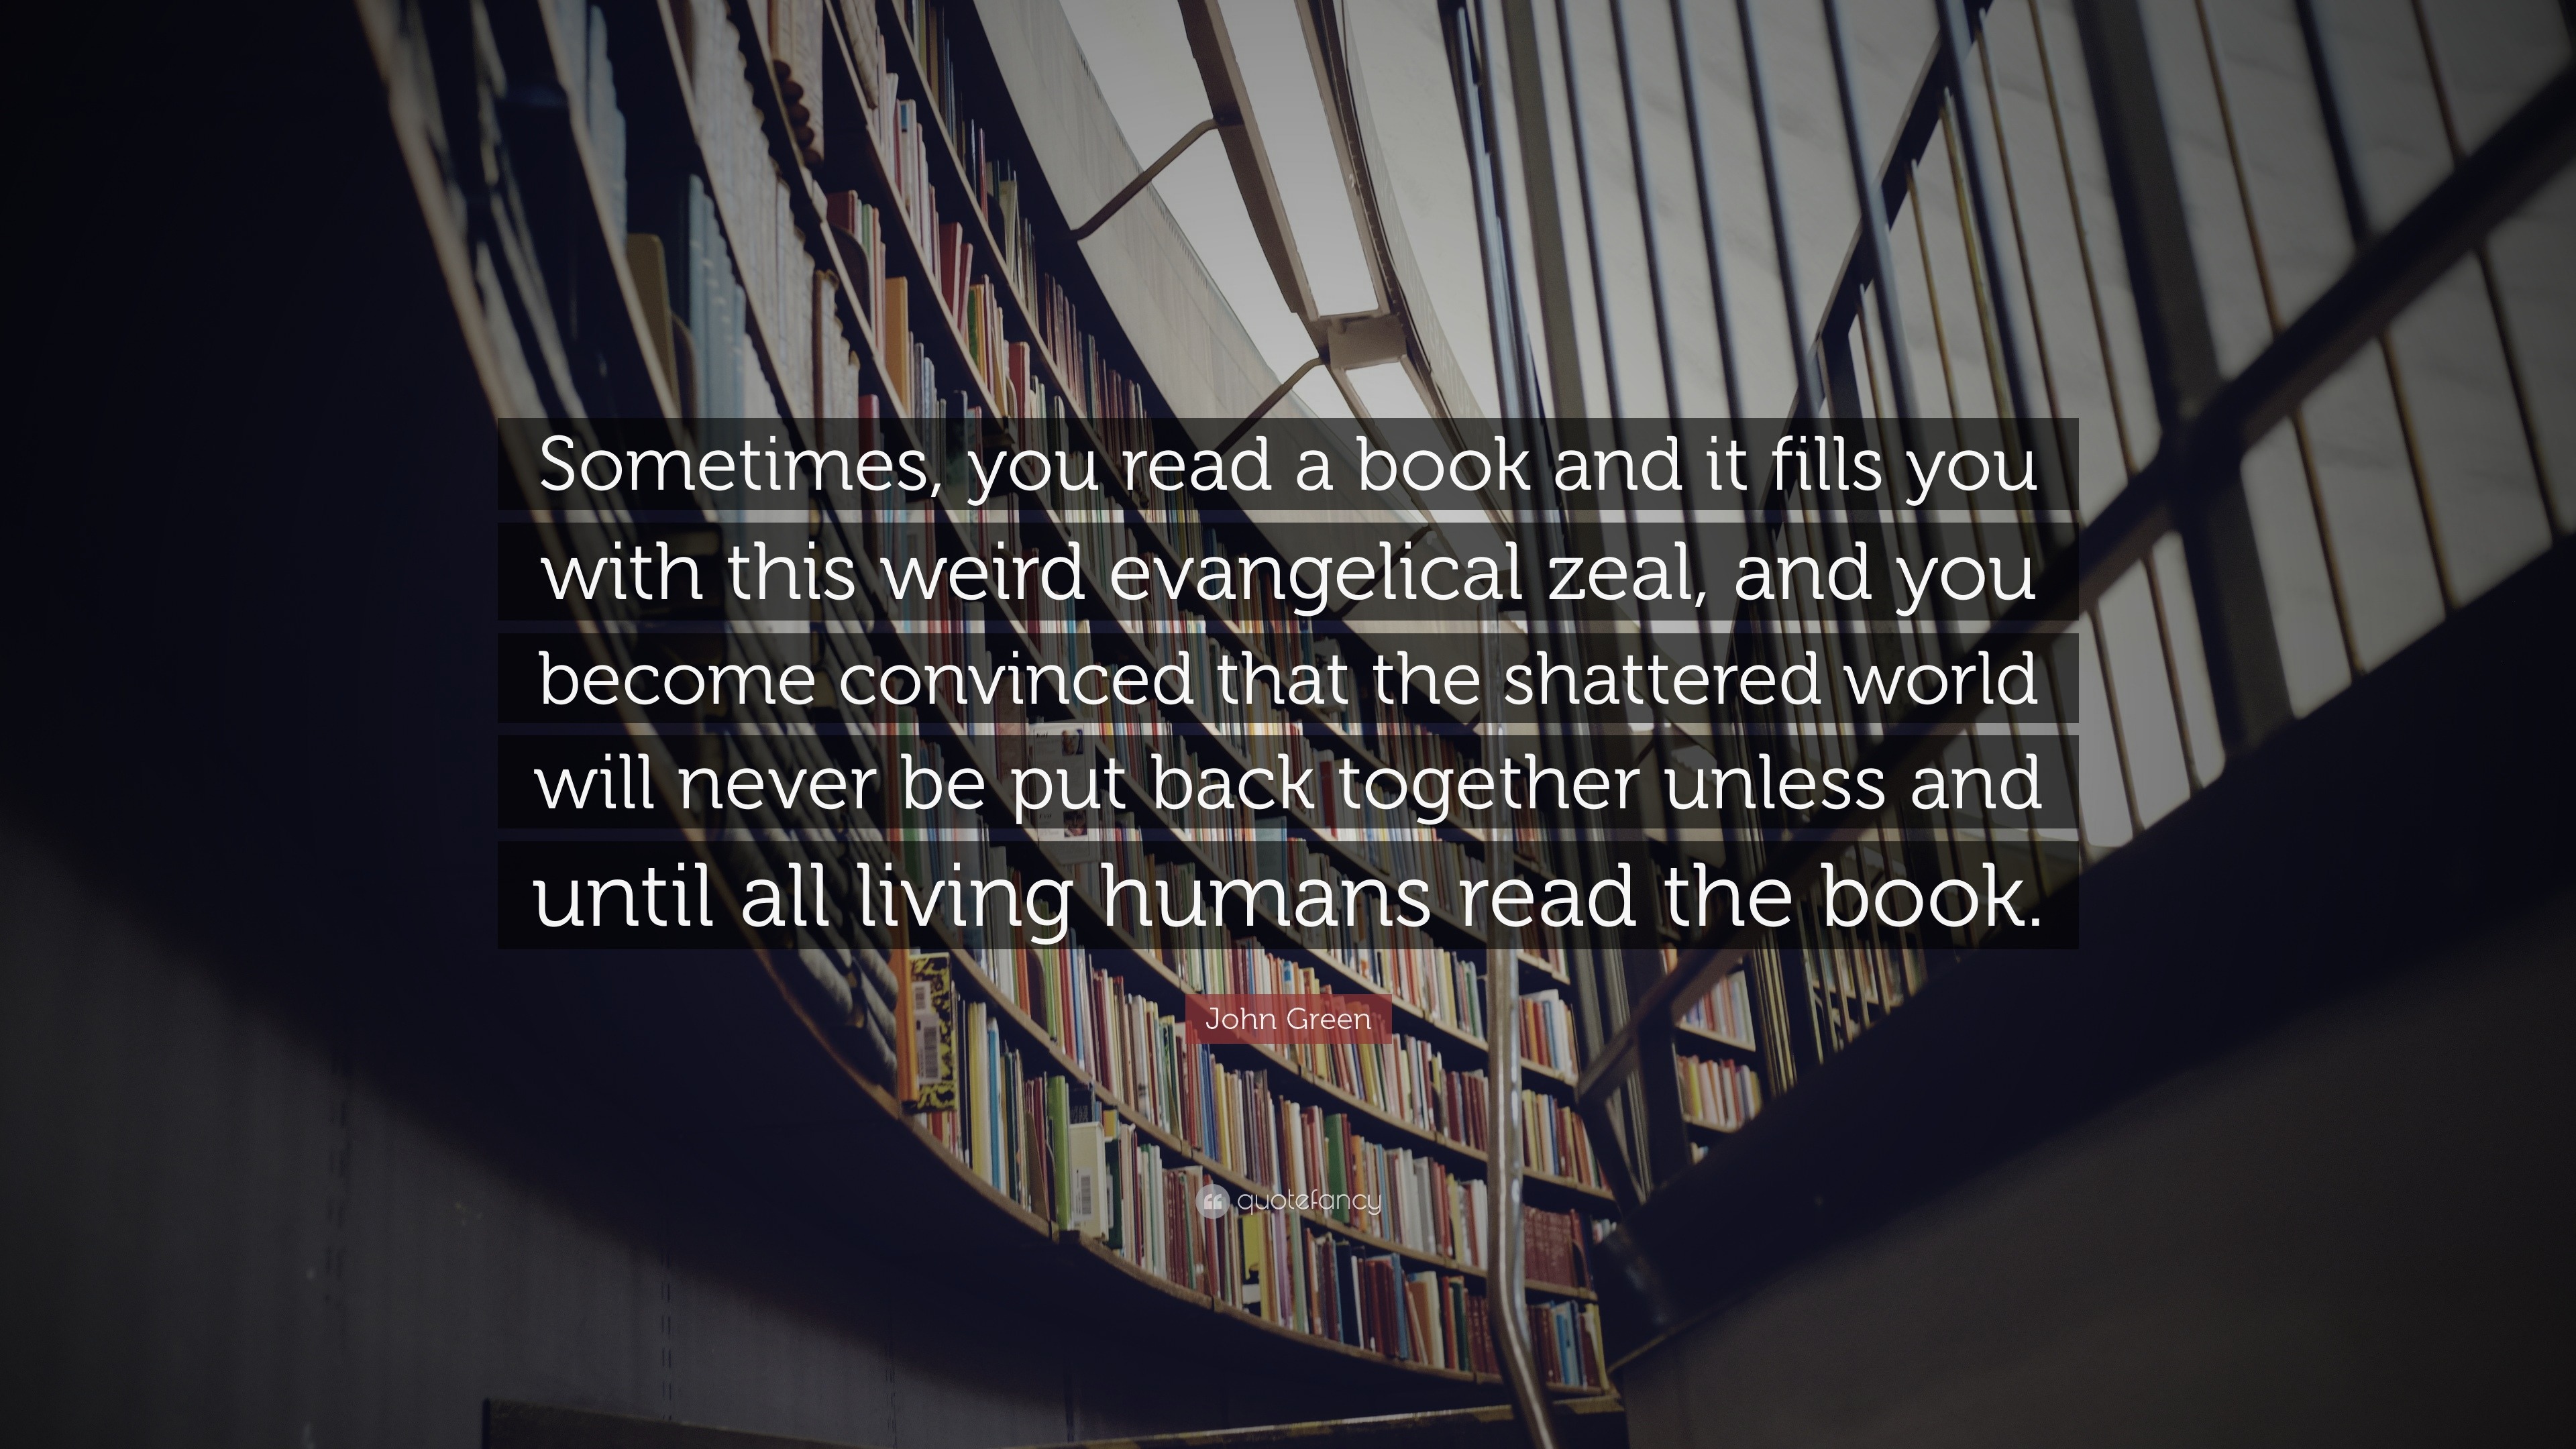 John Green Quote: “Sometimes, you read a book and it fills you with